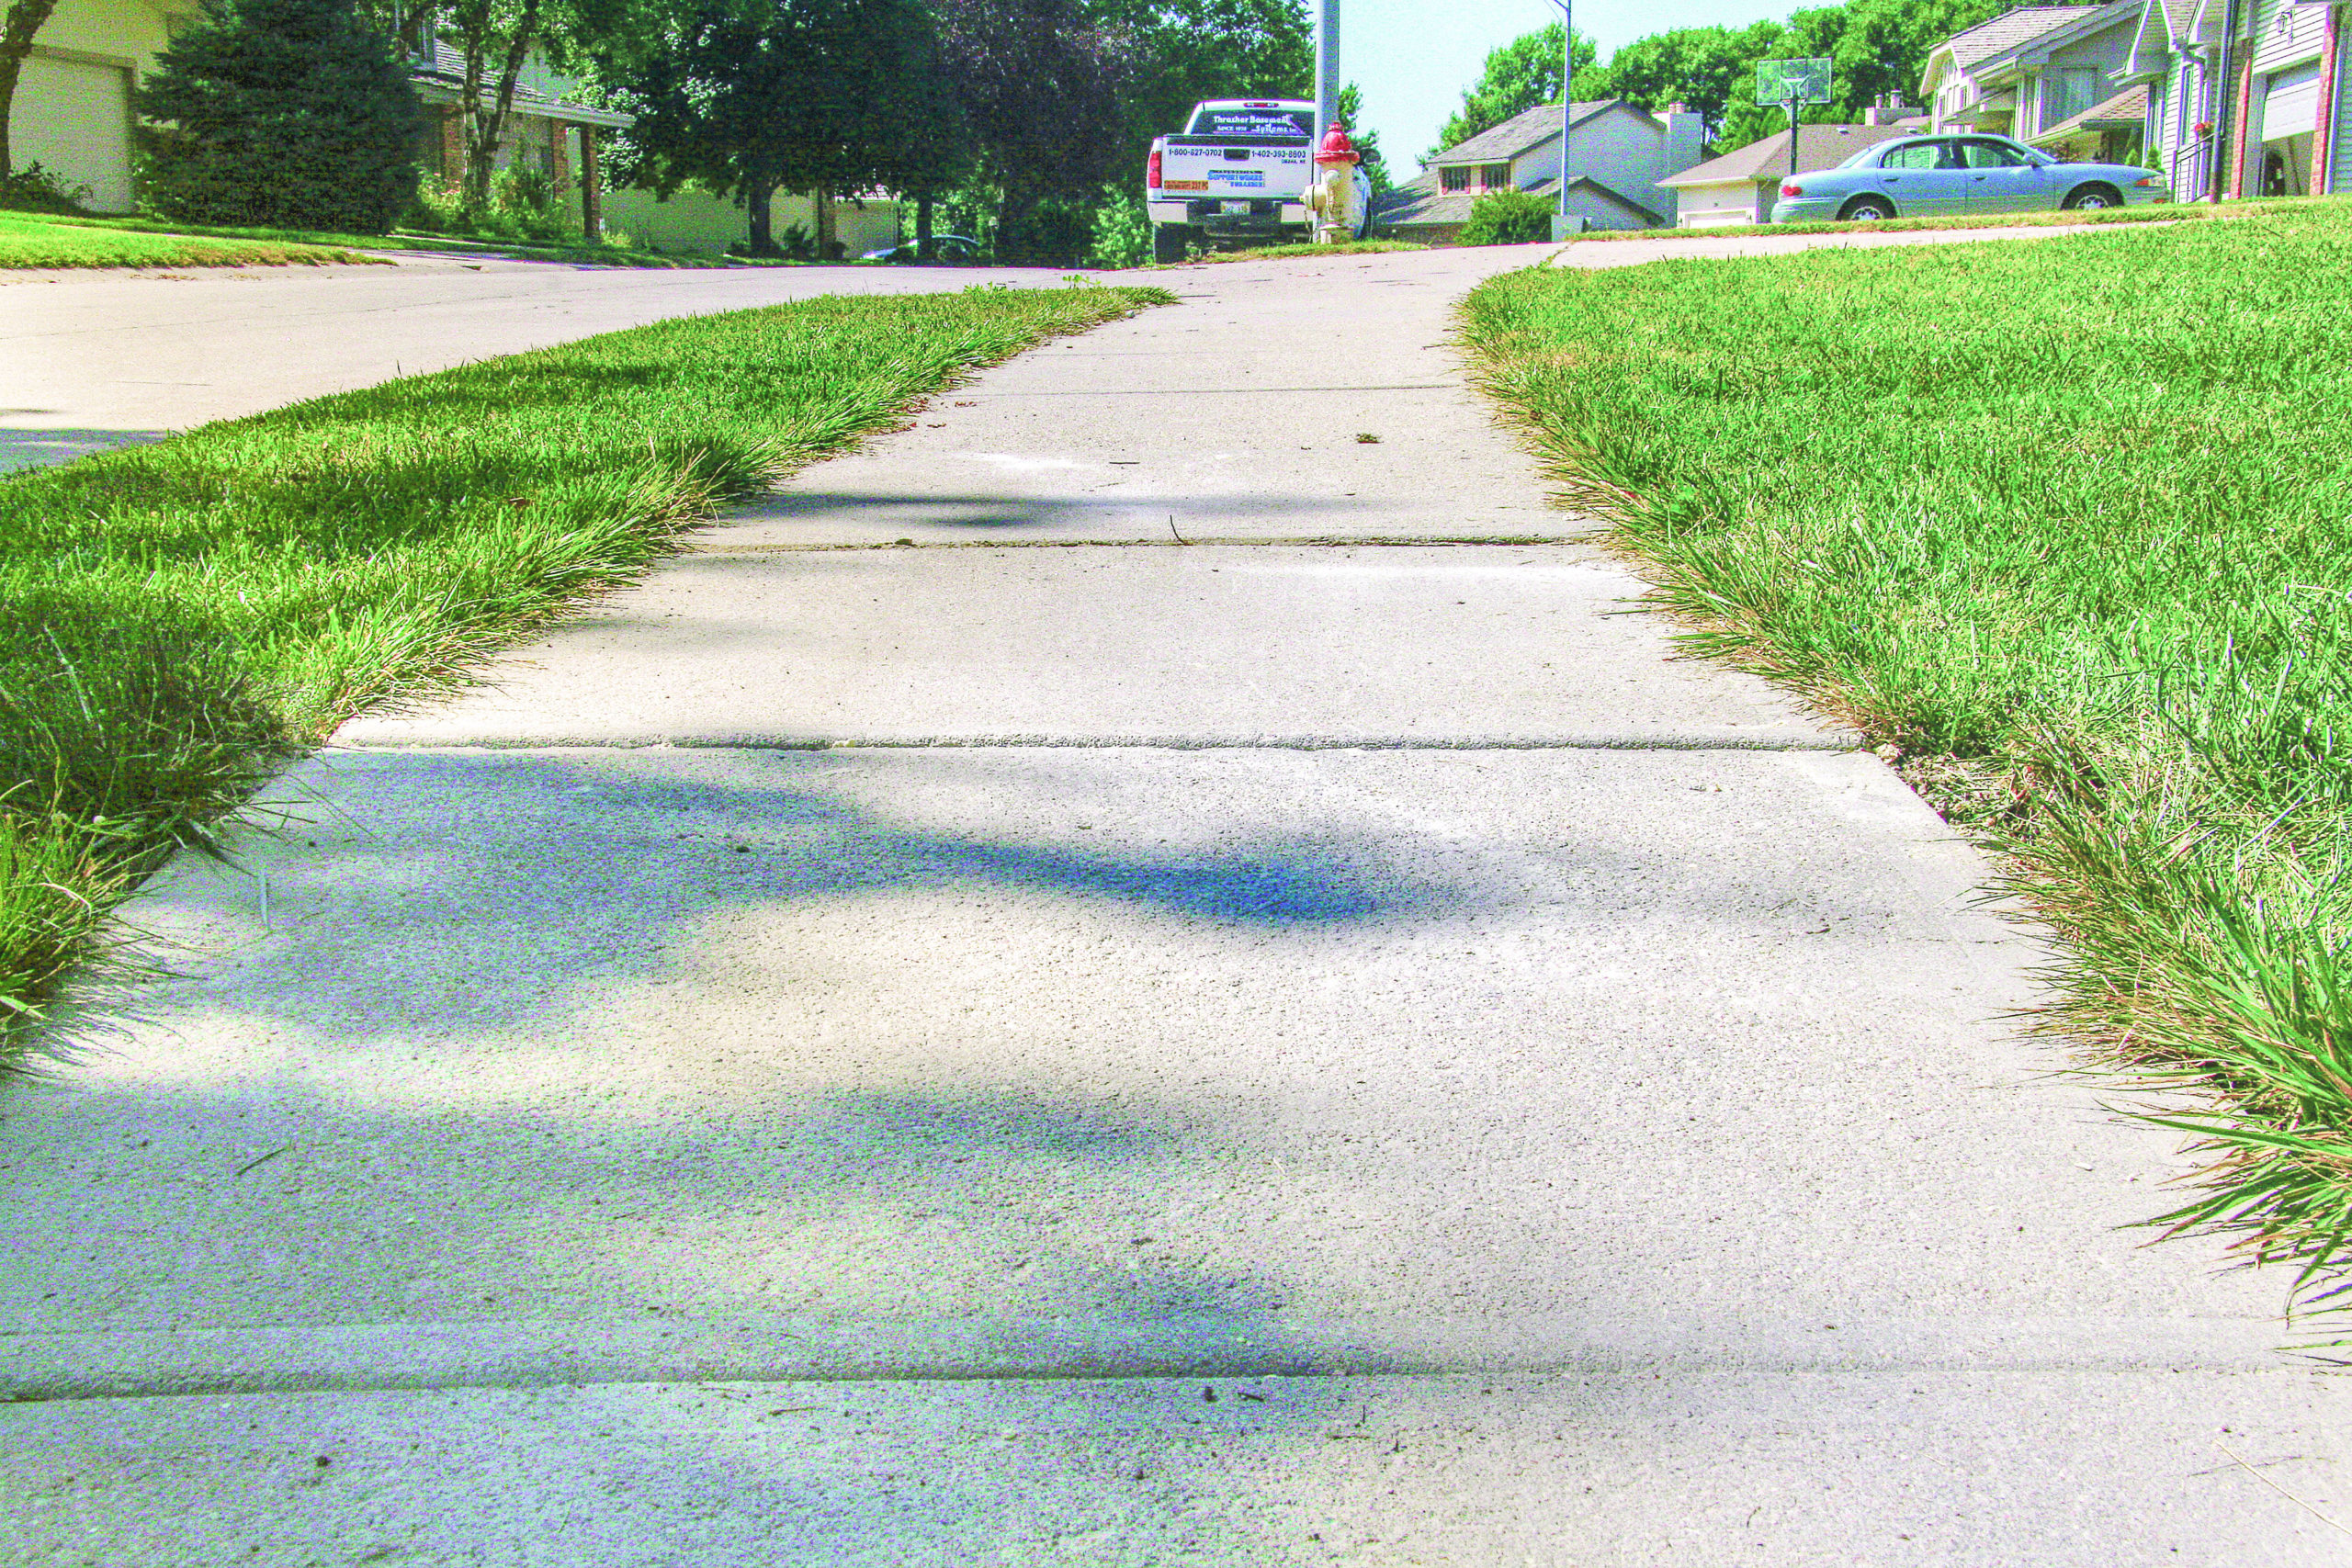 Sidewalk Repair | Even Home Sidewalk | After SmartLevel Concrete Repairs and Leveling